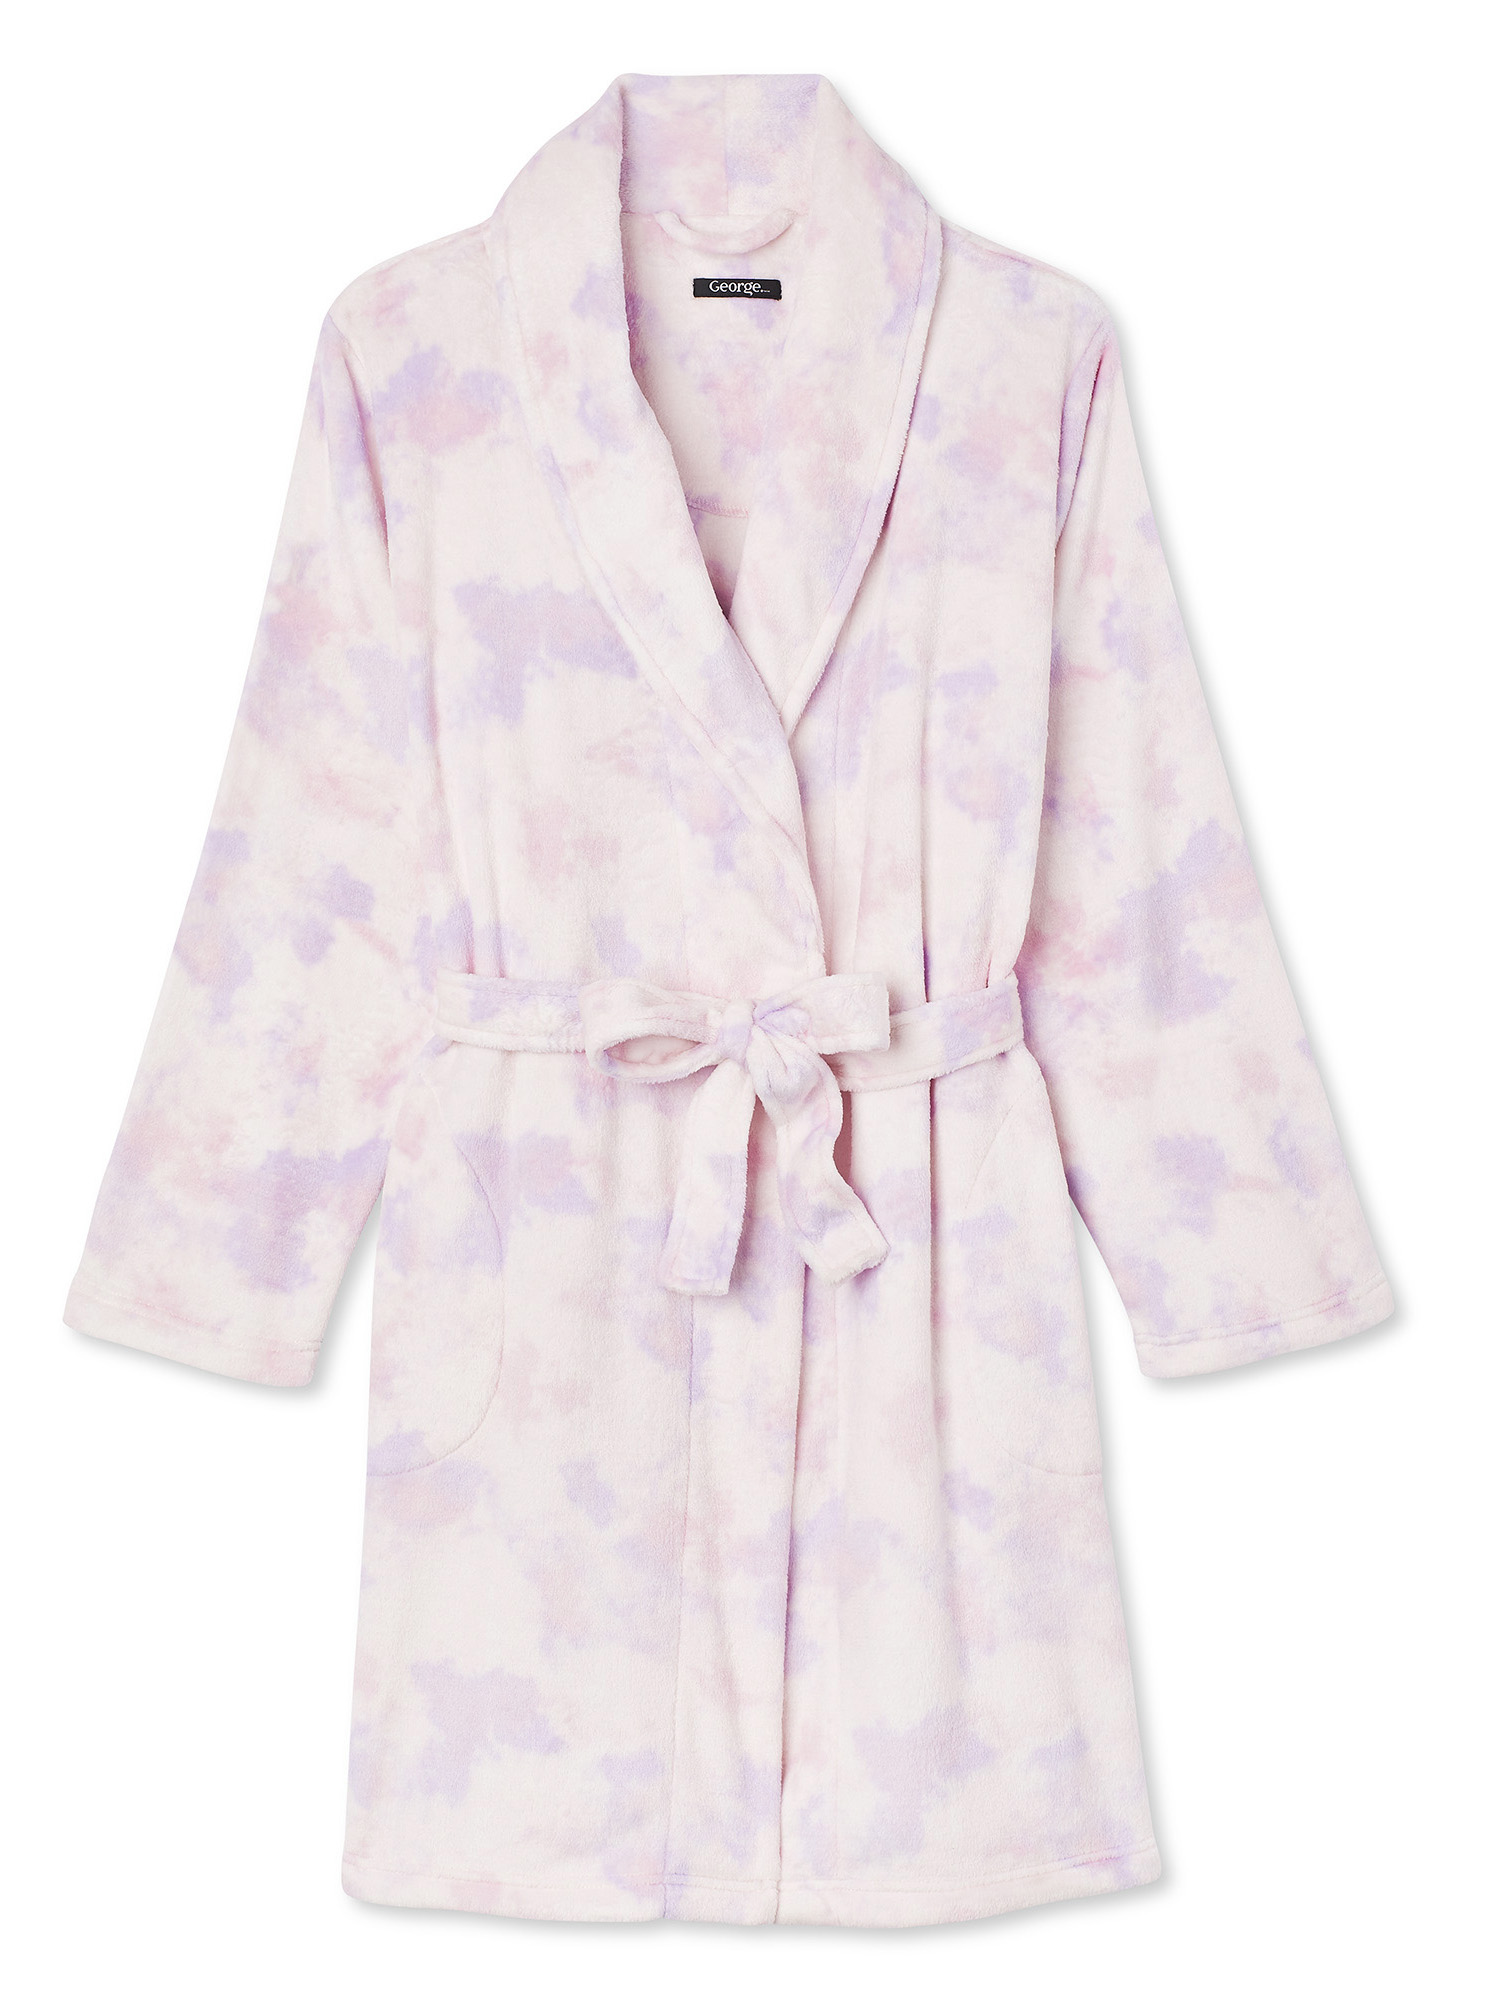 George Women's and Women's Plus Robe - image 6 of 6